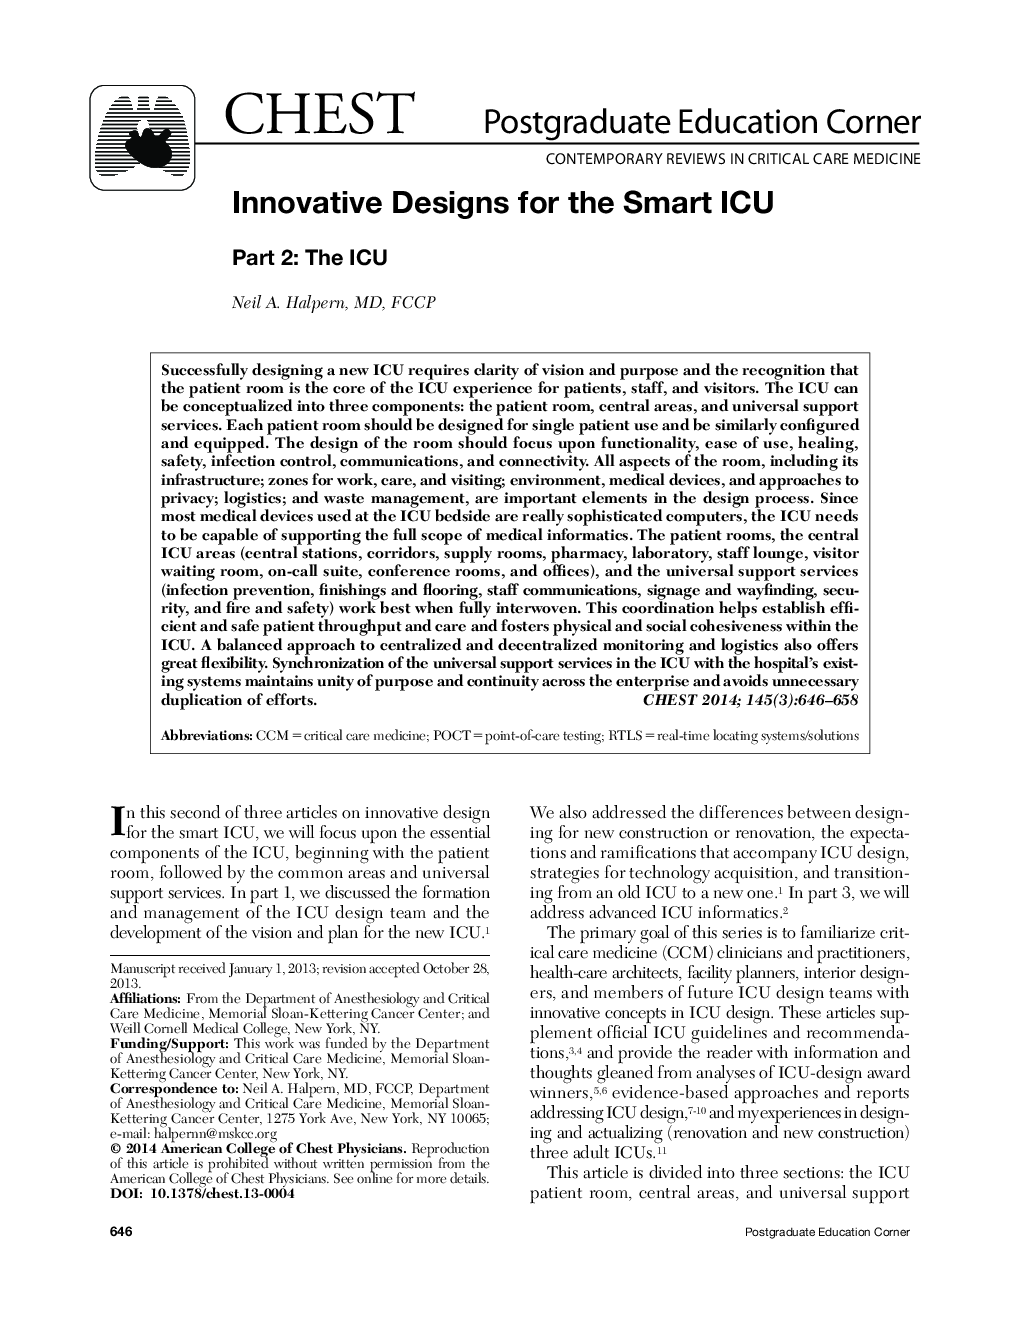 Innovative Designs for the Smart ICU 